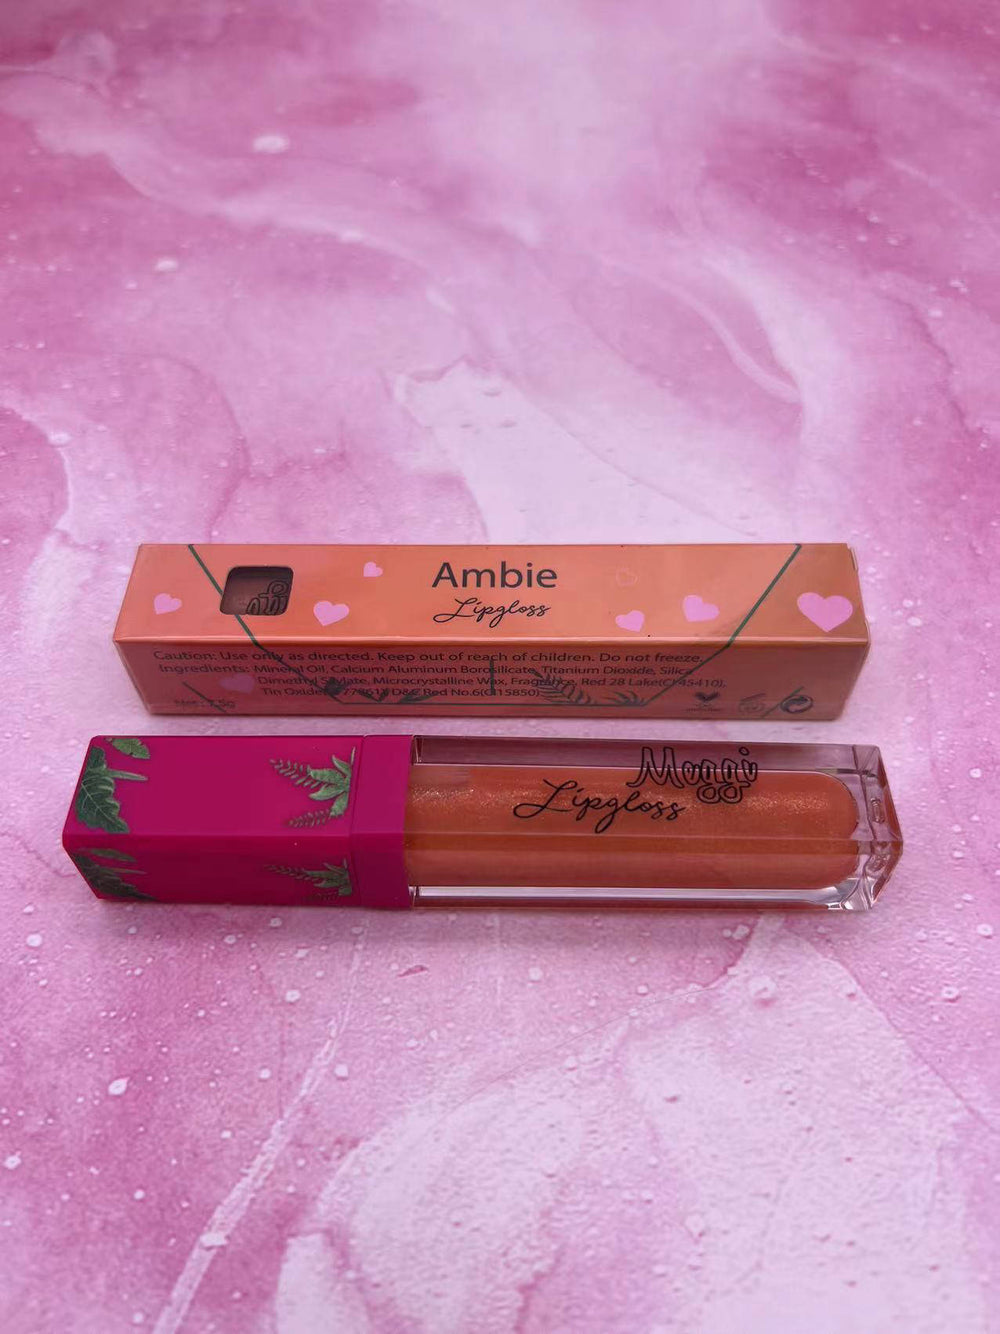 Ambie Lip gloss (Amber collection)